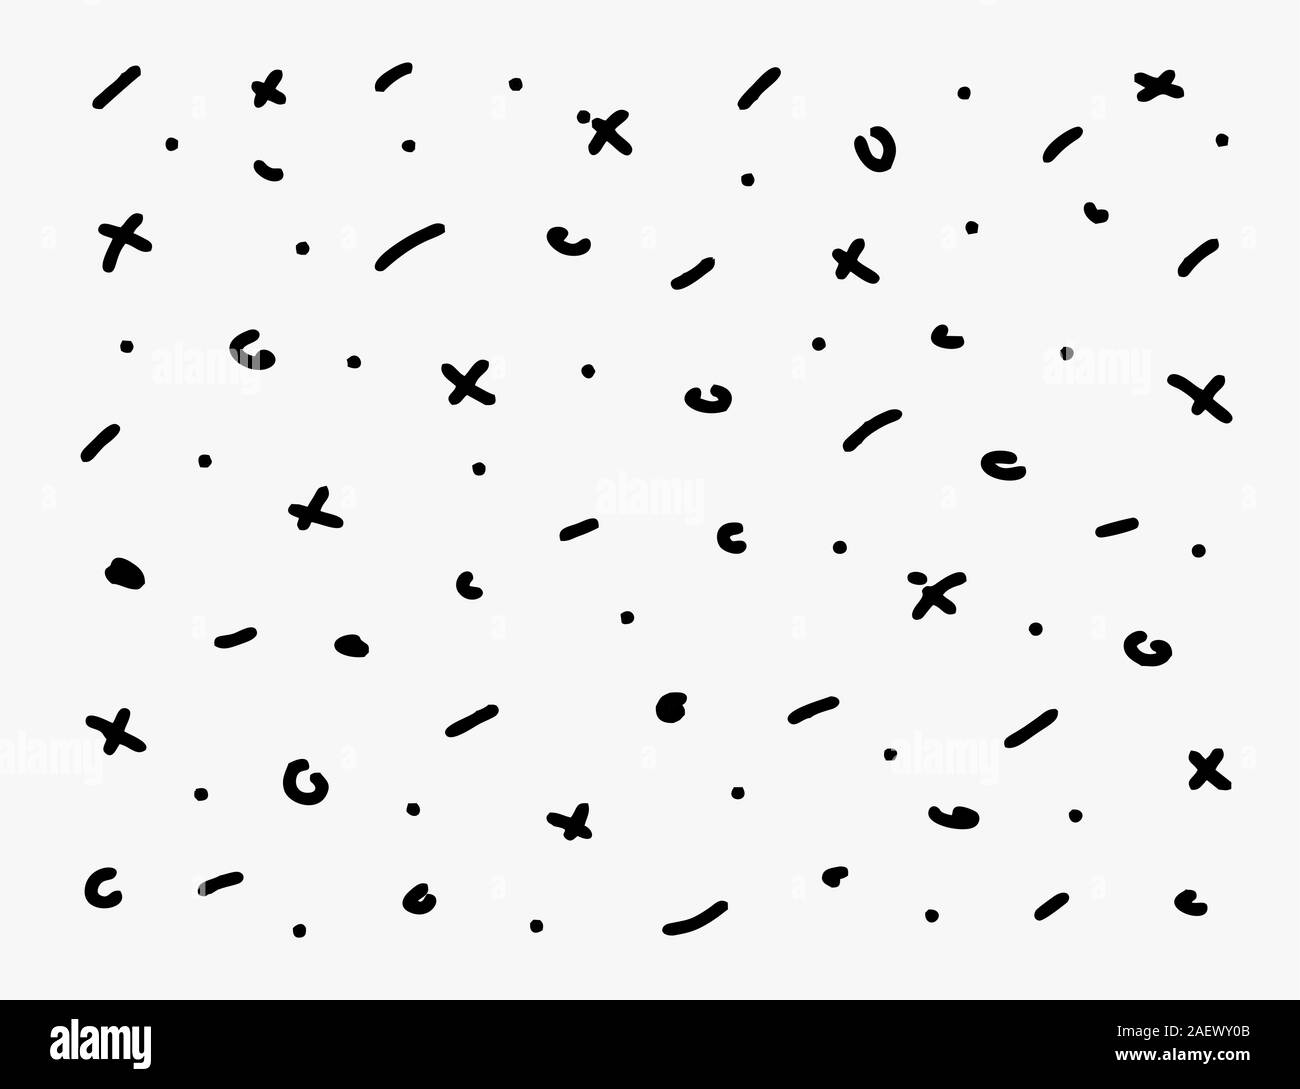 Doodle simple vector hand drawn pattern with crosses, dots and lines. Abstract outline background Stock Vector